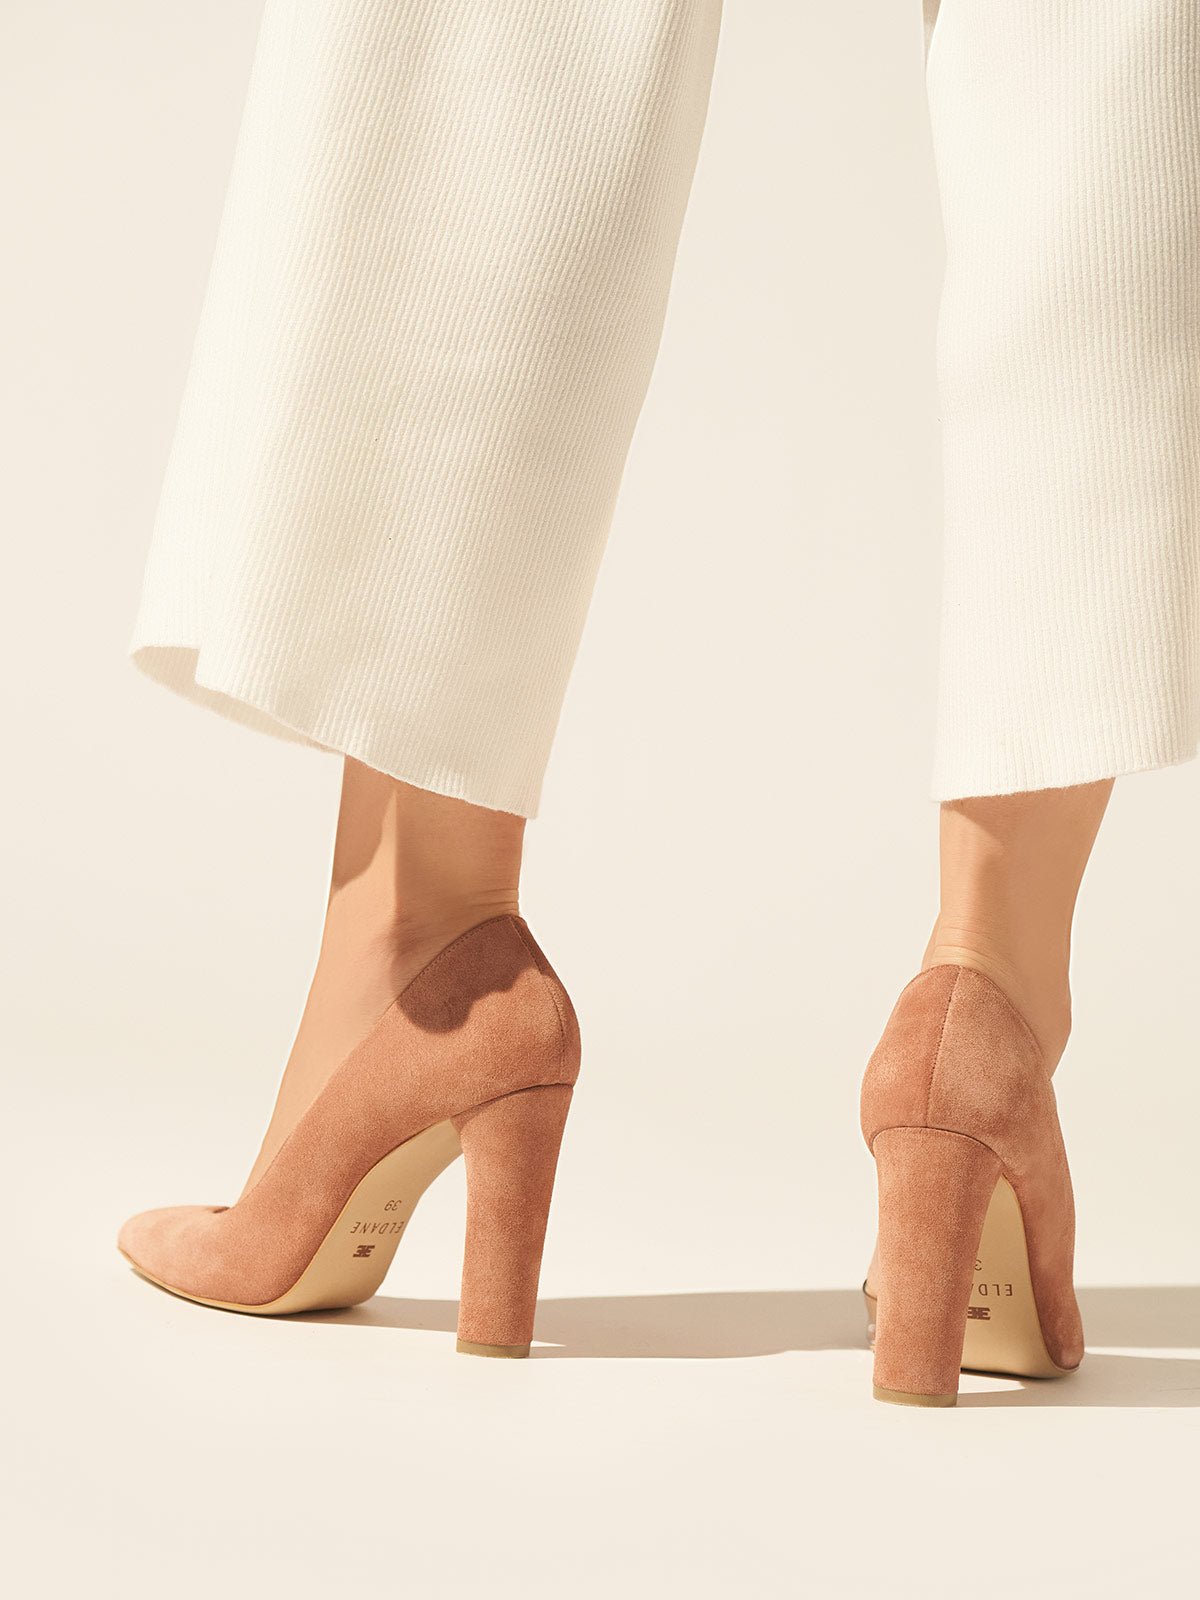 Heeled leather pumps in dusty pink suede